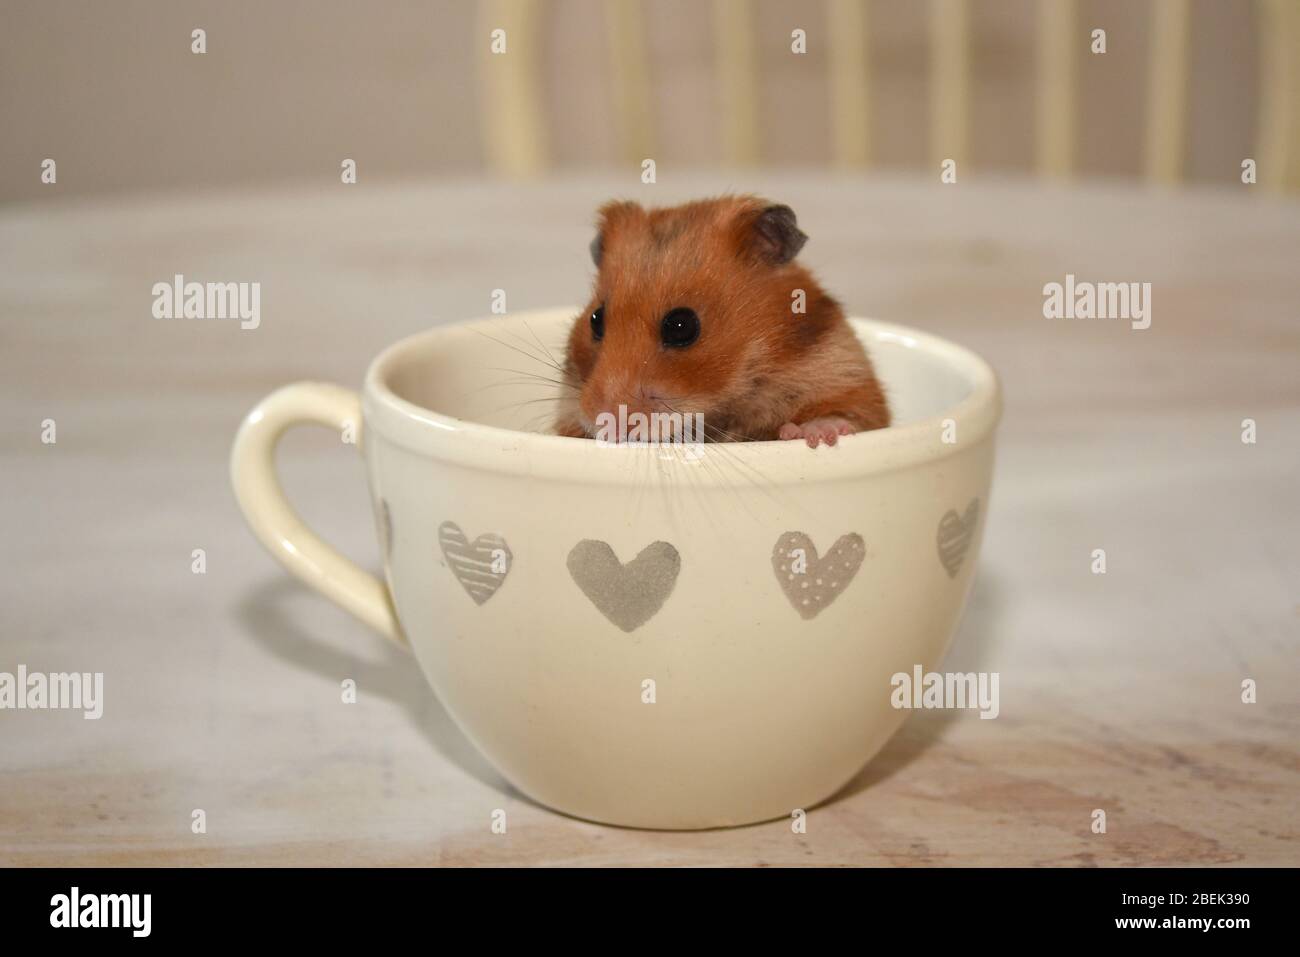 Hamster in a tea cup Stock Photo